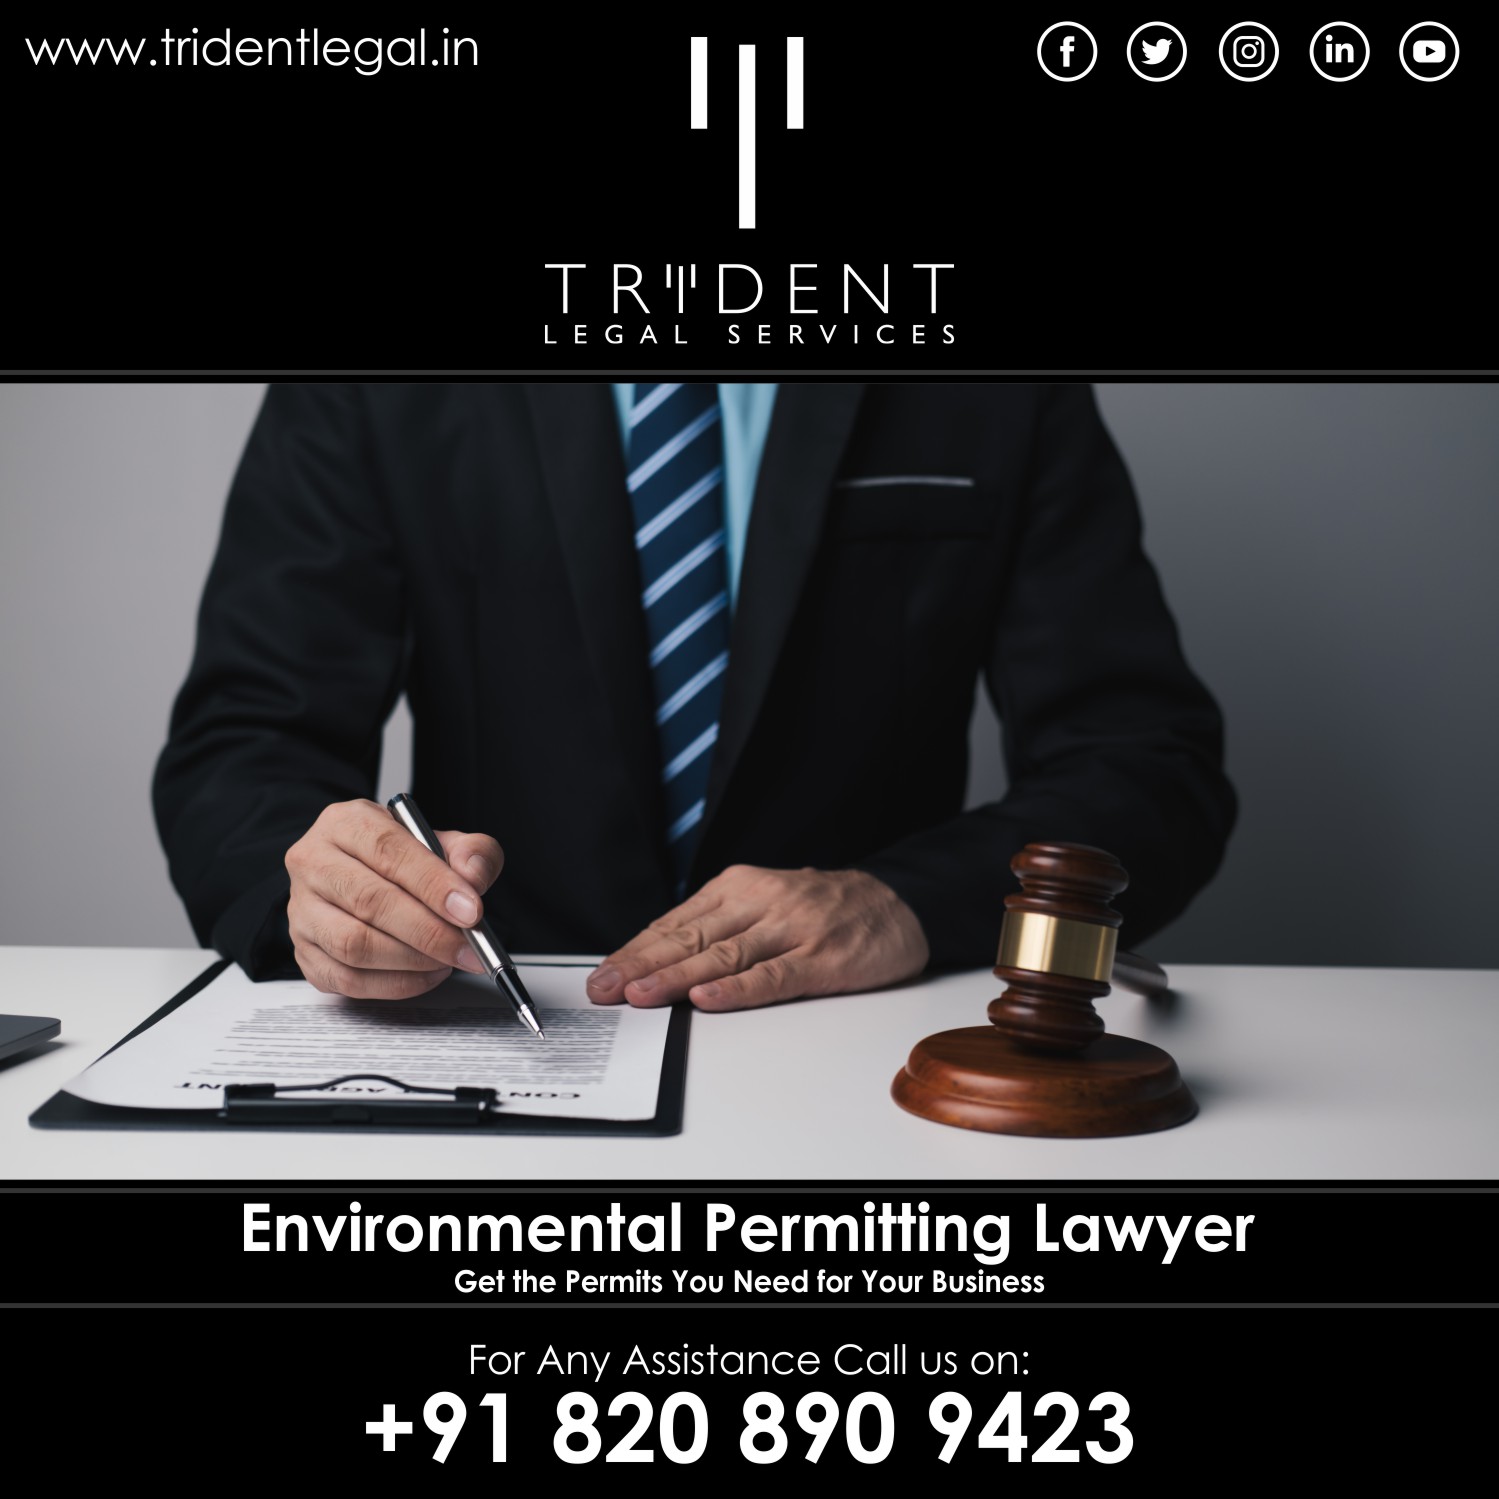 Environmental Permitting Lawyer in Pune